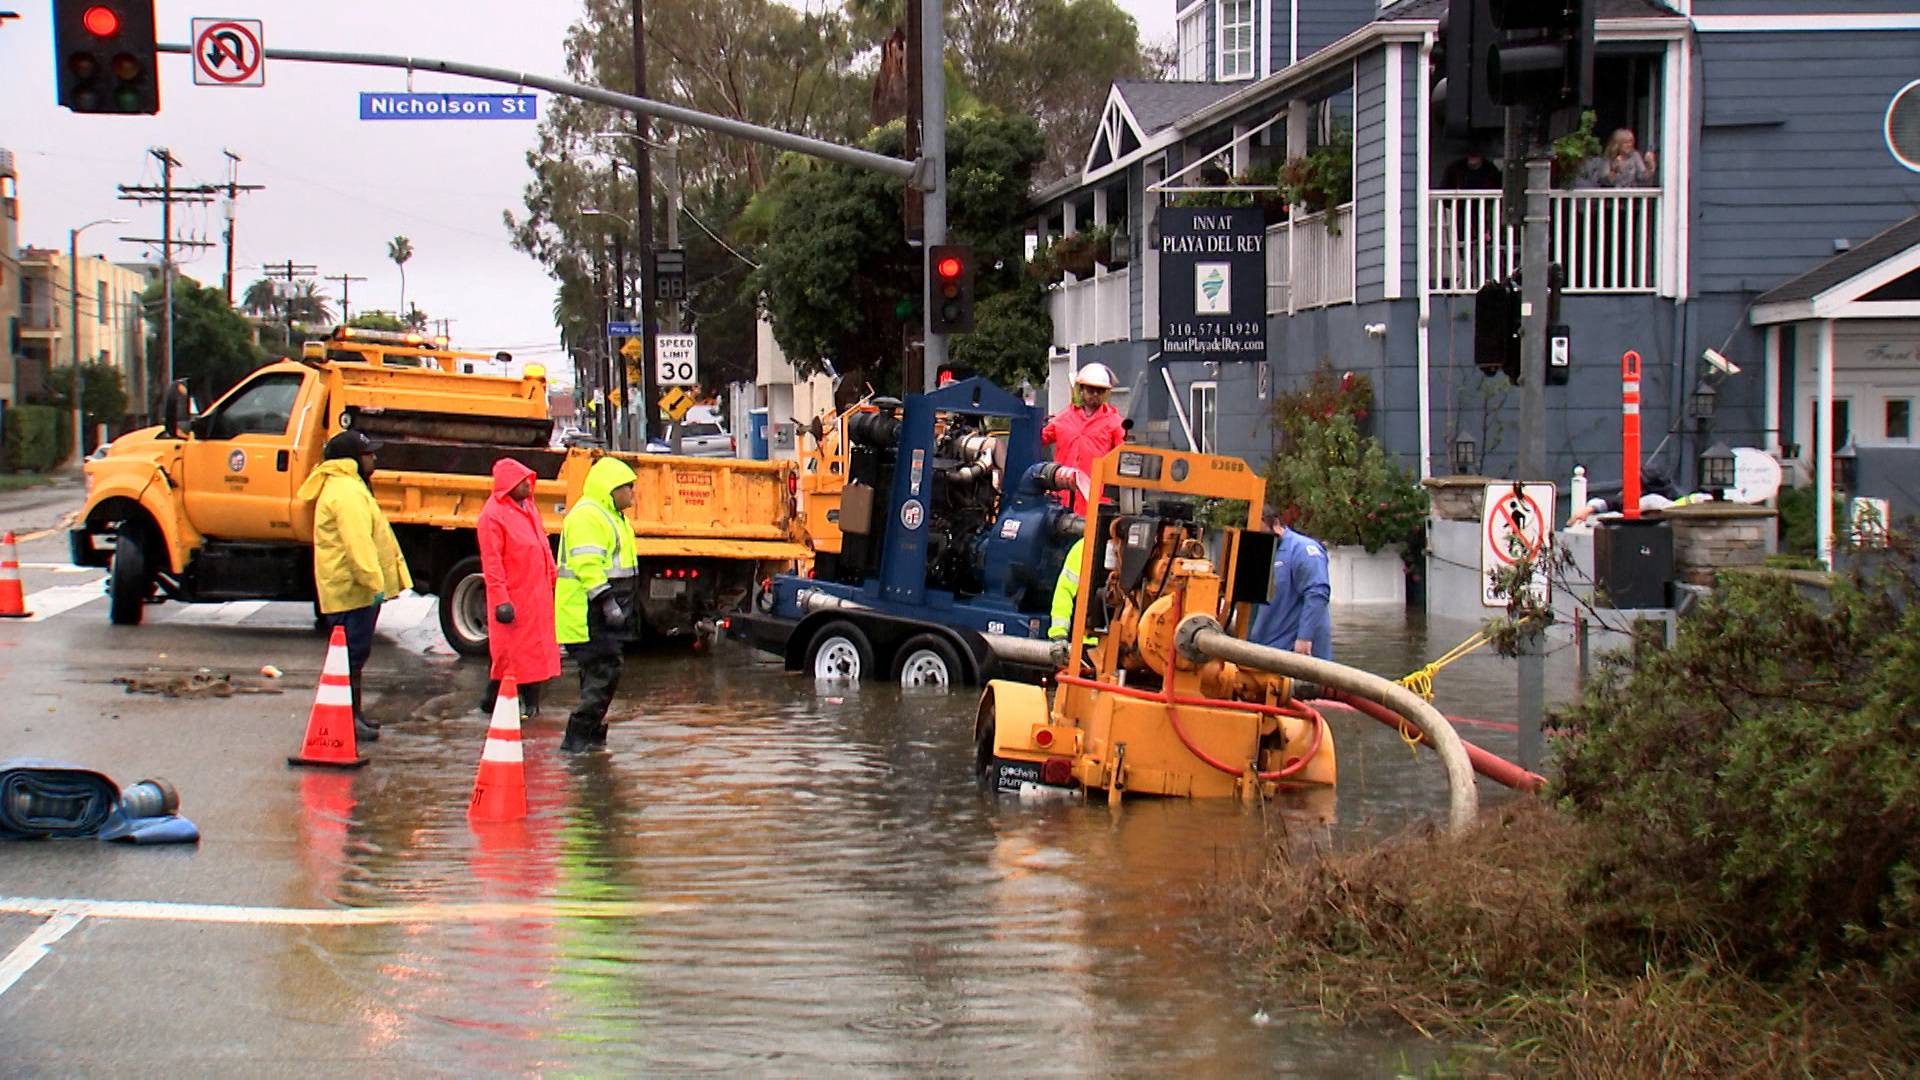 Workers pump flood water from the street surrounding the Inn at Playa del Rey, after heavy rains hit Southern California